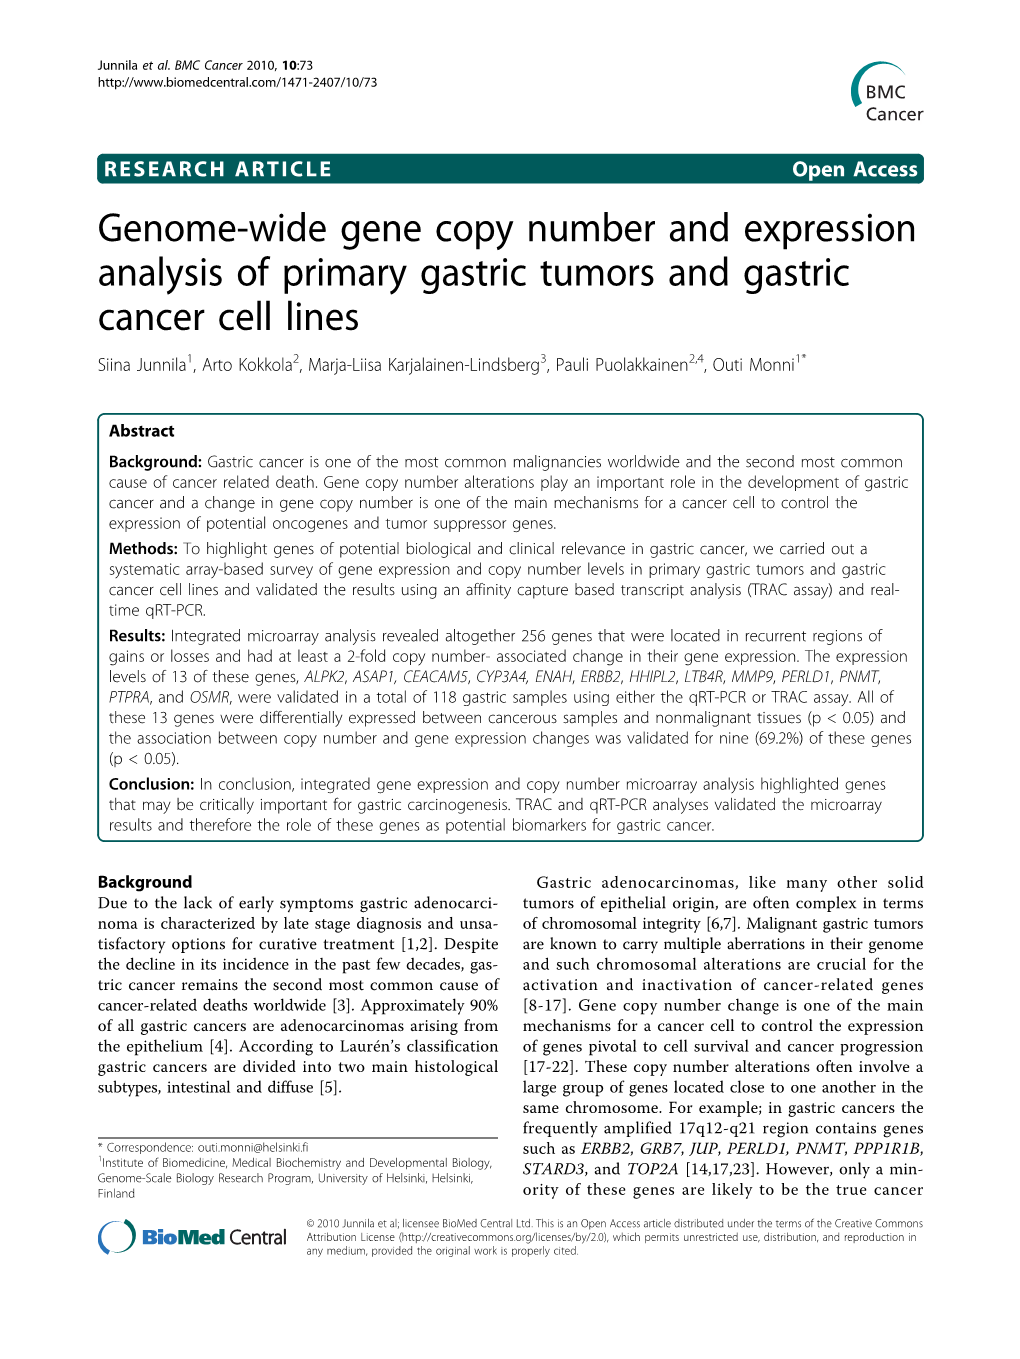 Genome-Wide Gene Copy Number and Expression Analysis of Primary